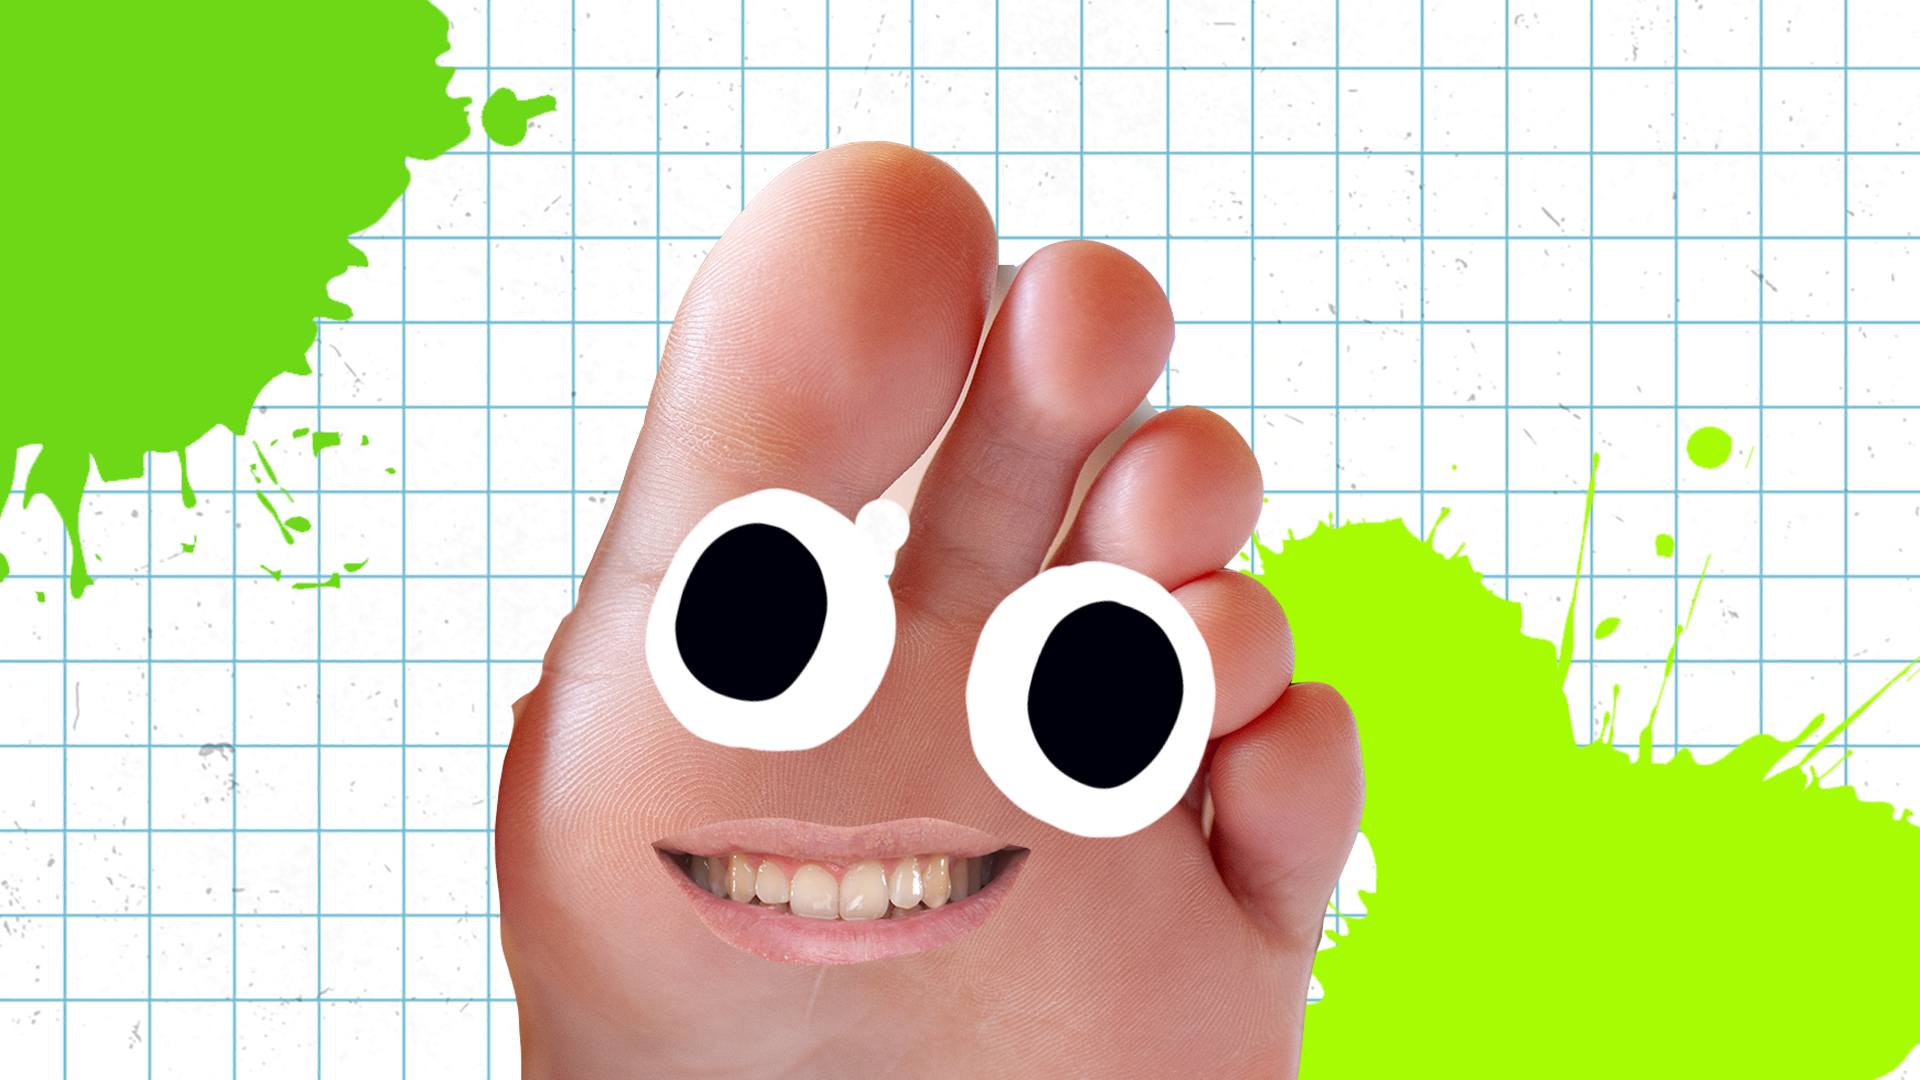 A smiling foot